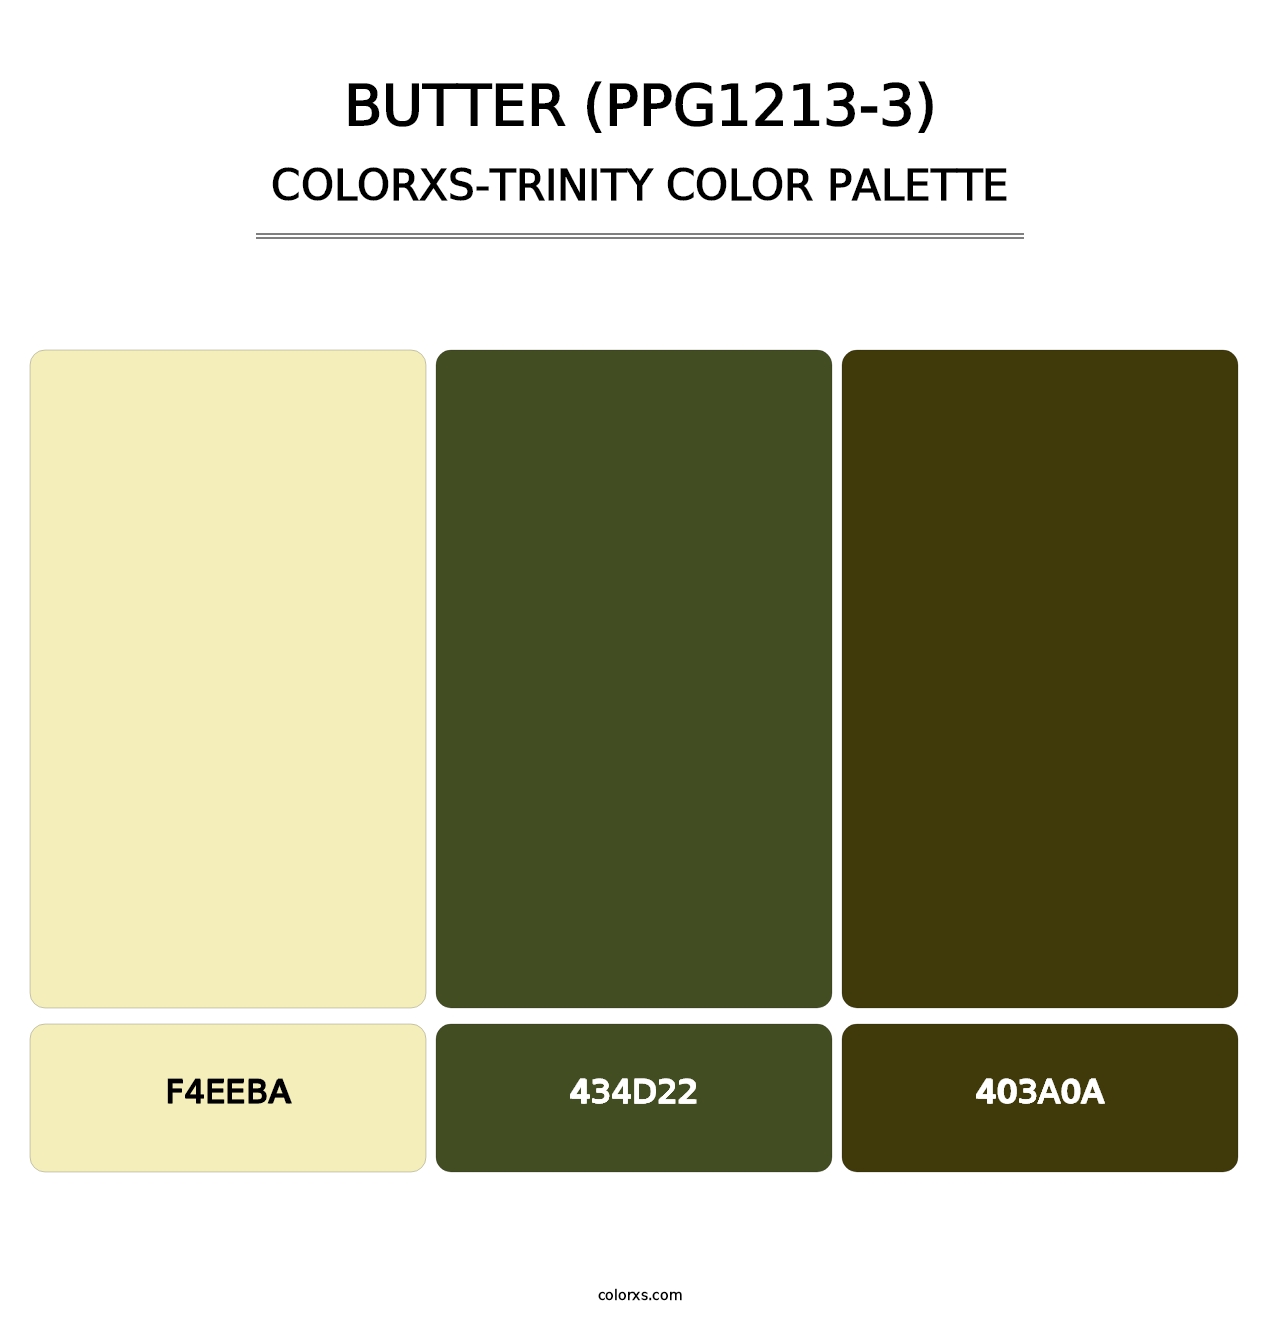 Butter (PPG1213-3) - Colorxs Trinity Palette